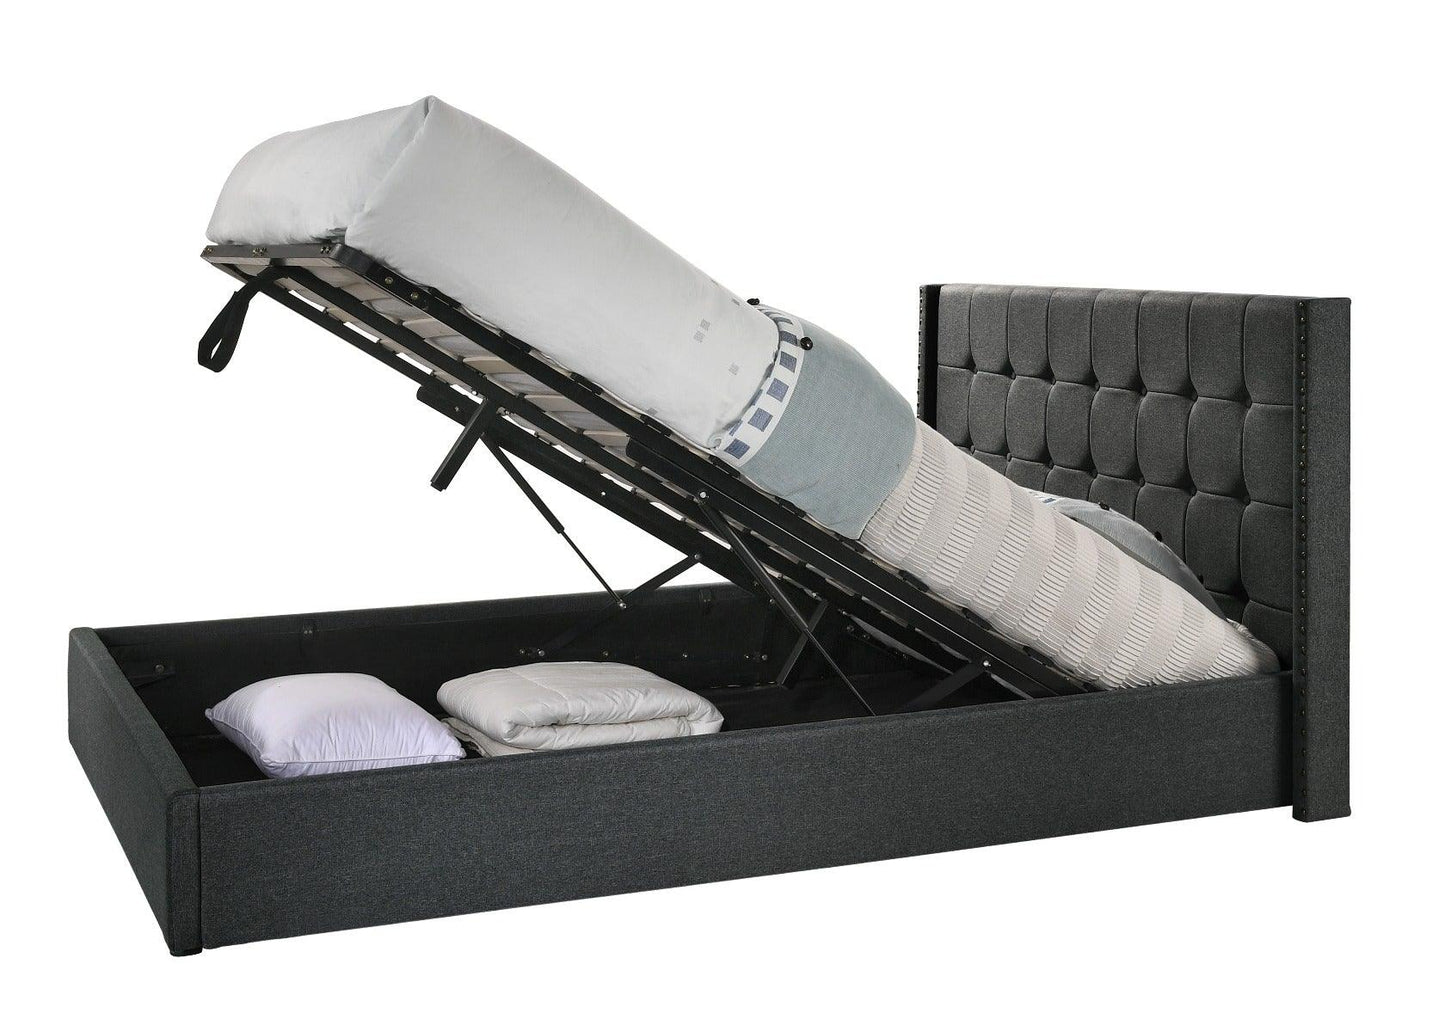 Queen Sized Winged Fabric Bed Frame with Gas Lift Storage in Charcoal